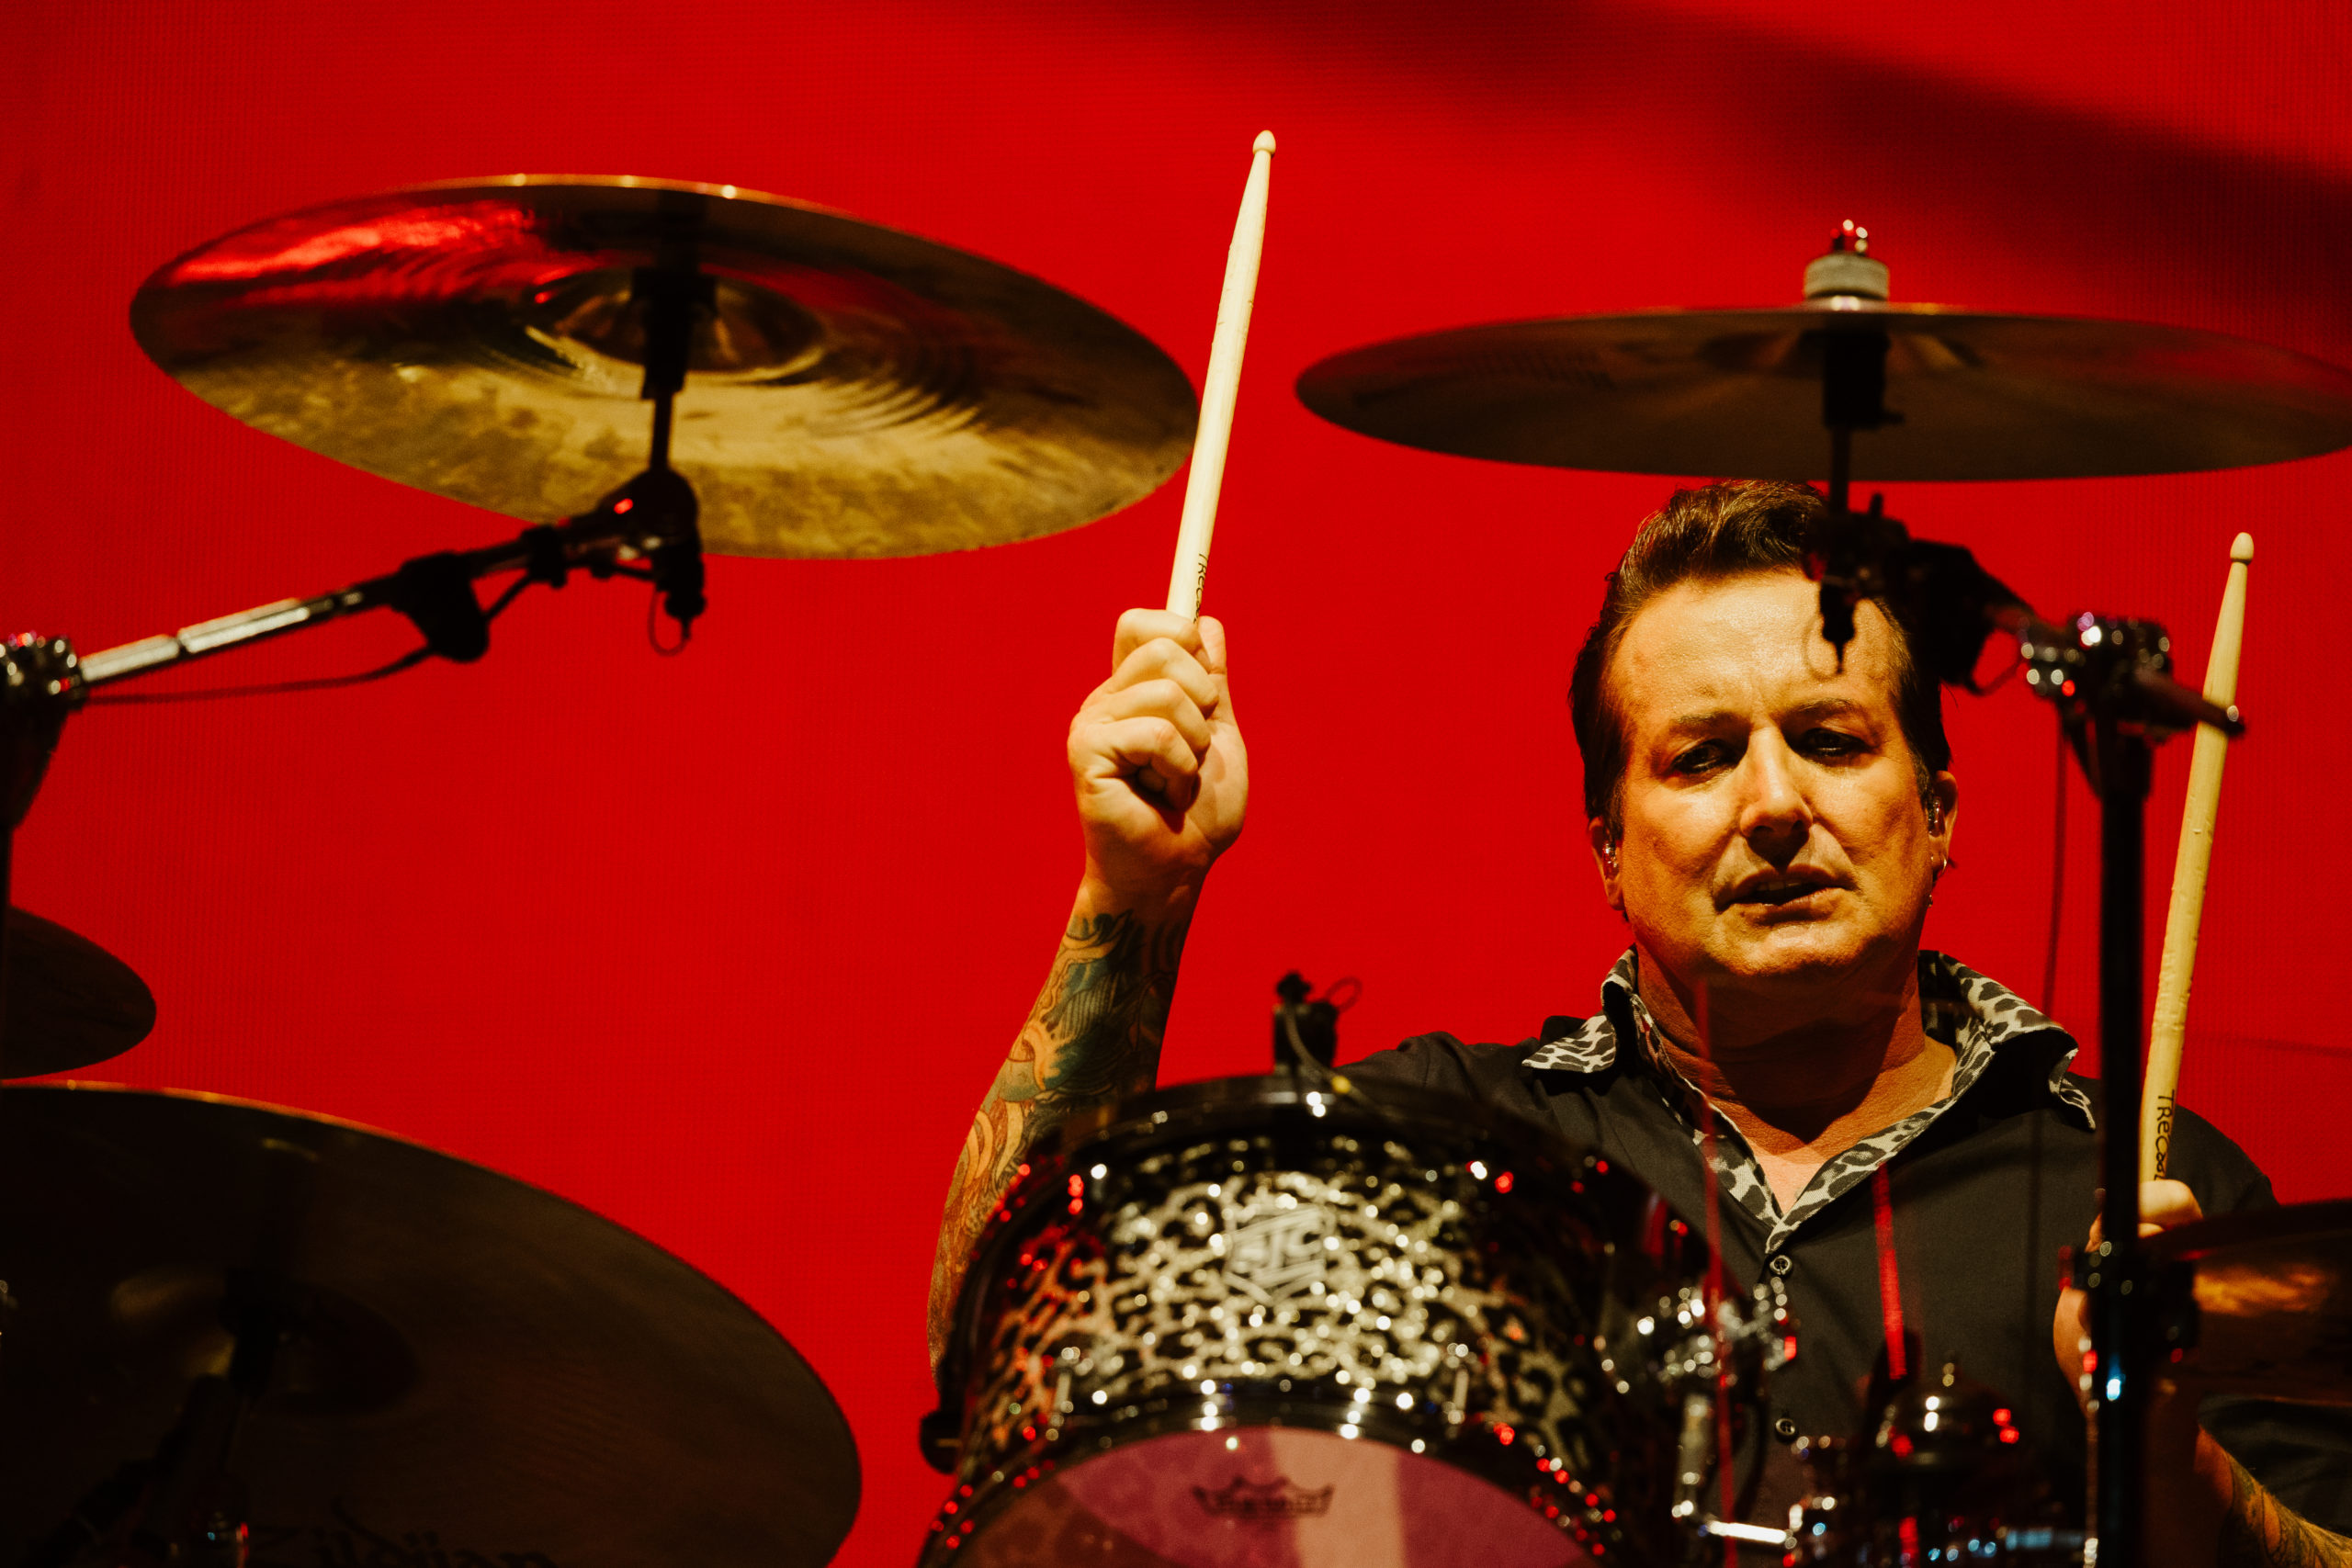 Tré Cool of Green Day